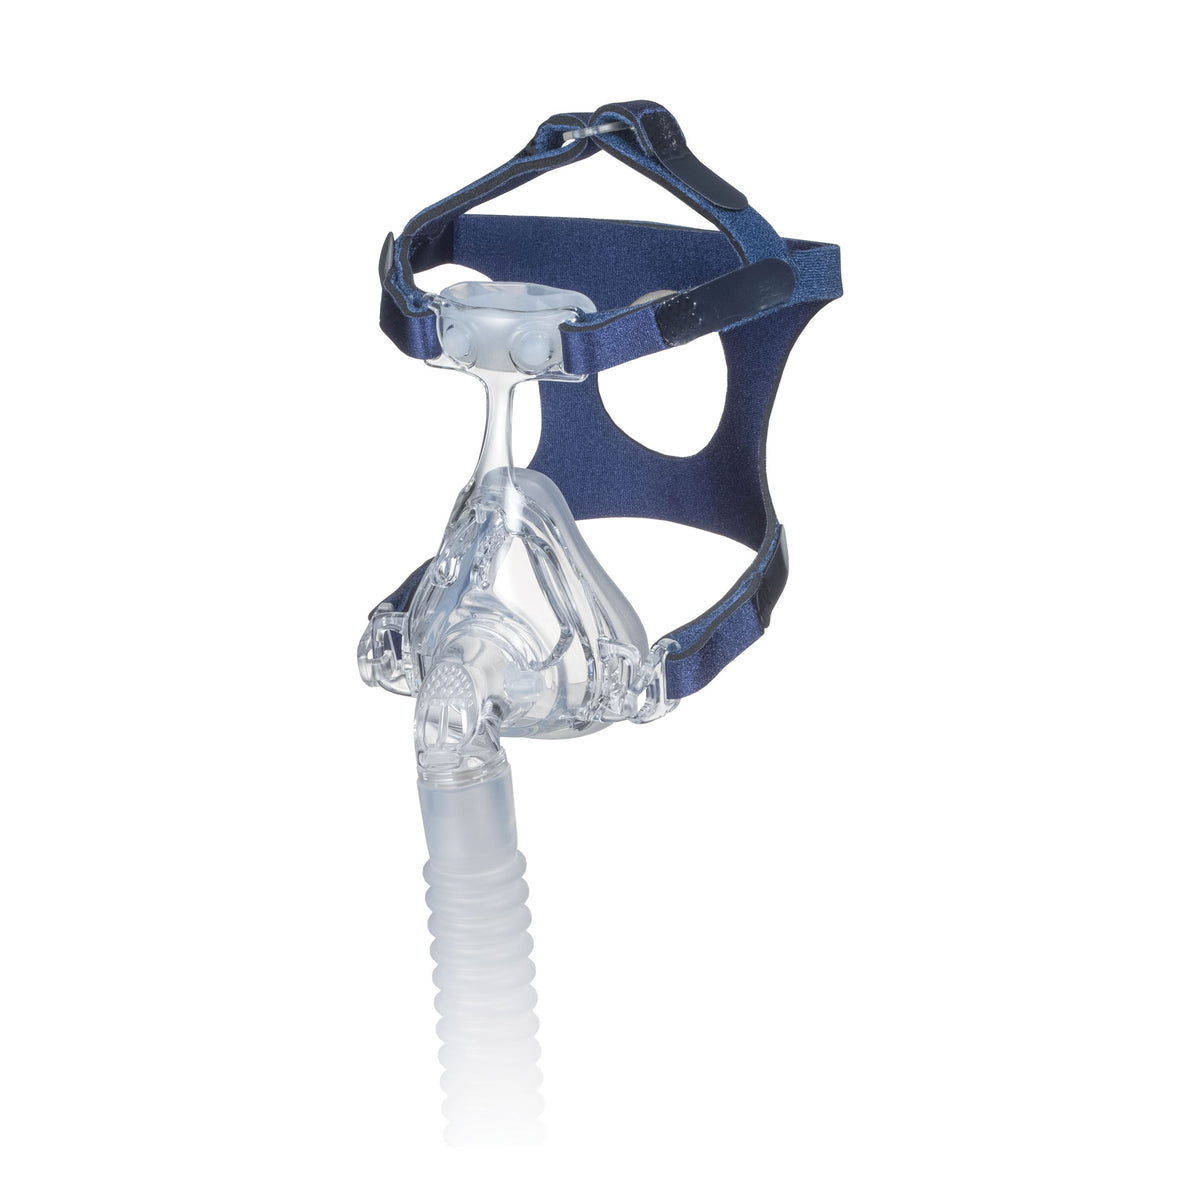 Sunset Ray Pediatric Full-Face CPAP Mask